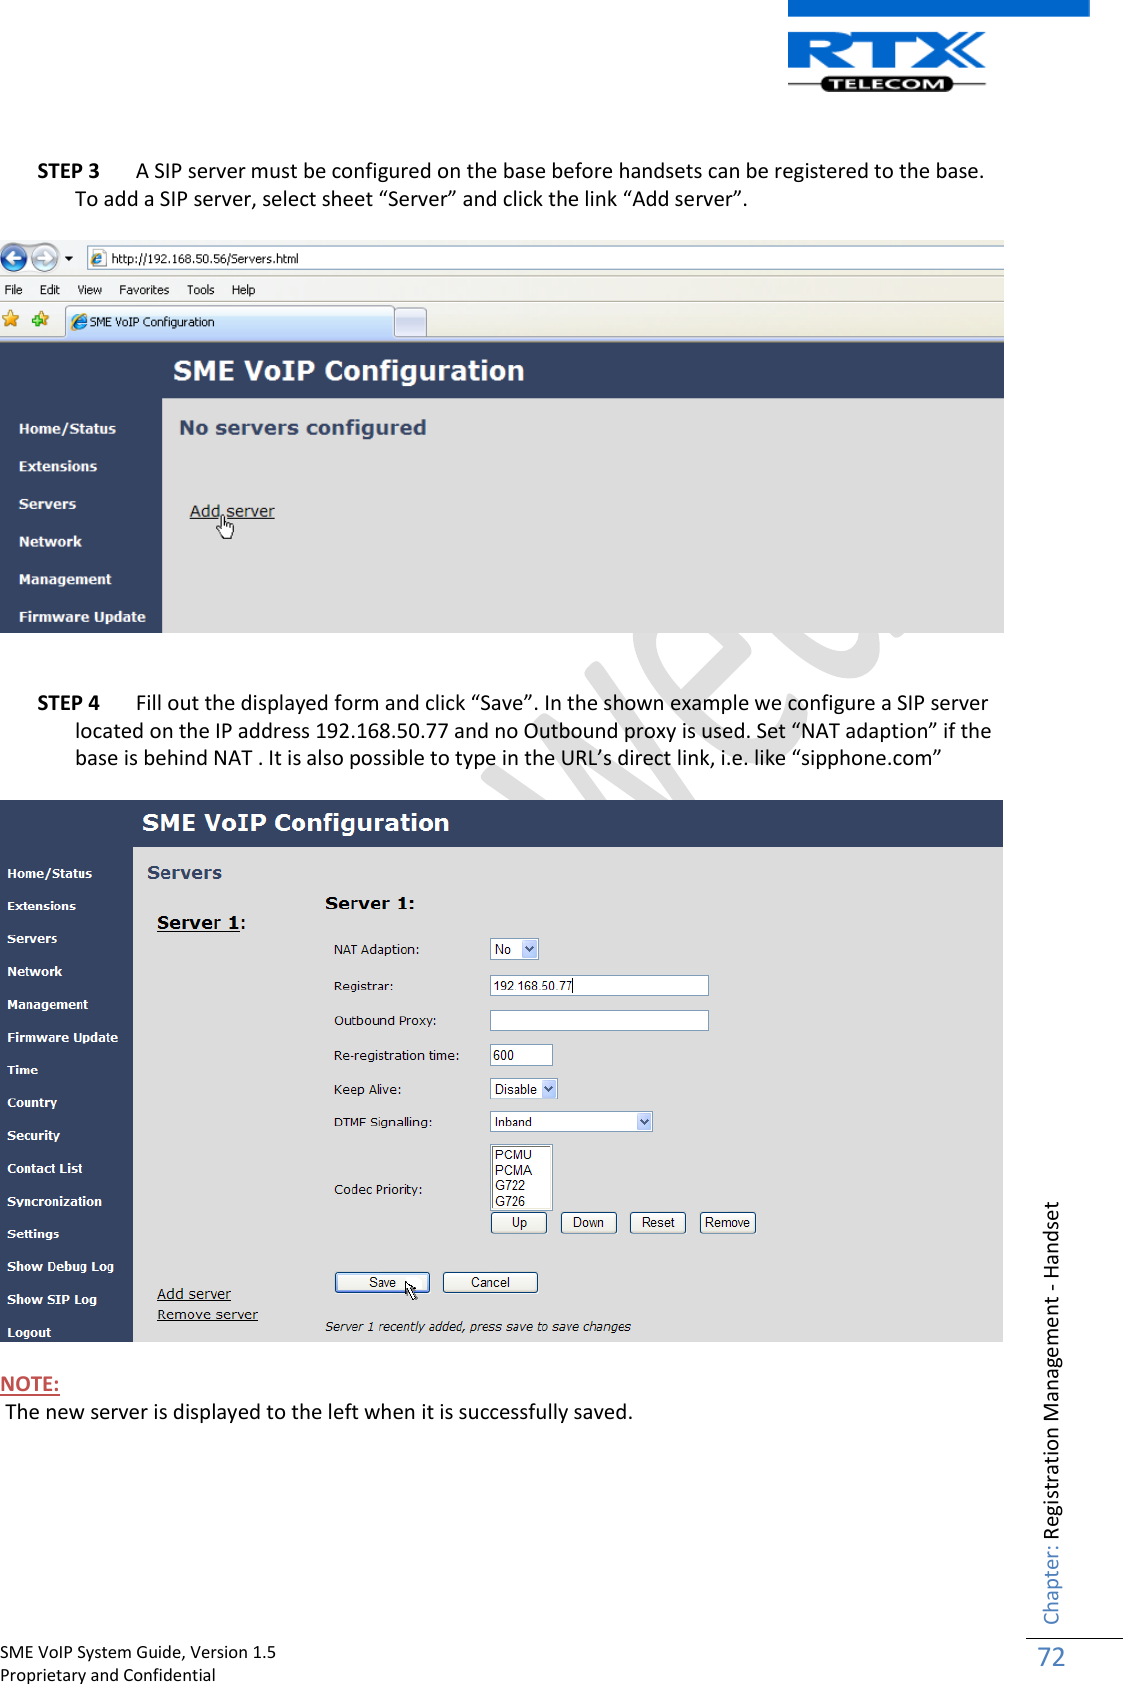    SME VoIP System Guide, Version 1.5                                                                                                                                                          Proprietary and Confidential    Chapter: Registration Management - Handset 72   STEP 3 A SIP server must be configured on the base before handsets can be registered to the base. To add a SIP server, select sheet “Server” and click the link “Add server”.      STEP 4 Fill out the displayed form and click “Save”. In the shown example we configure a SIP server located on the IP address 192.168.50.77 and no Outbound proxy is used. Set “NAT adaption” if the base is behind NAT . It is also possible to type in the URL’s direct link, i.e. like “sipphone.com”    NOTE:  The new server is displayed to the left when it is successfully saved. 